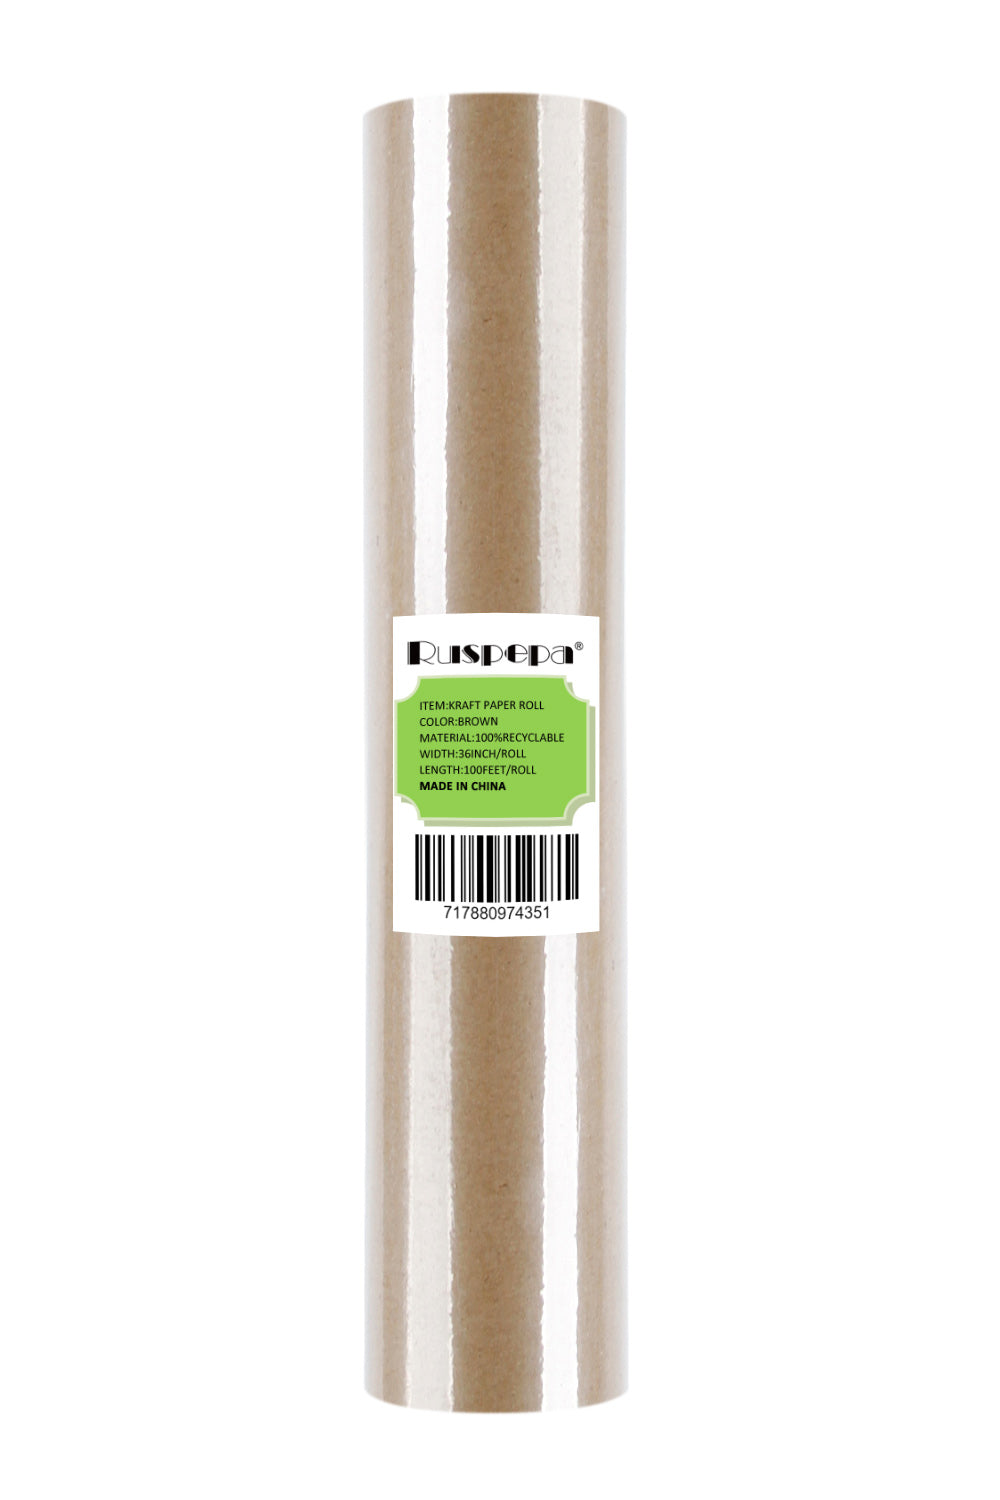 RUSPEPA Brown Kraft Paper Roll - 36 Inches x 100 Feet - Recyclable Paper Perfect for Wrapping, Craft, Packing, Floor Covering, Dunnage, Parcel, Table